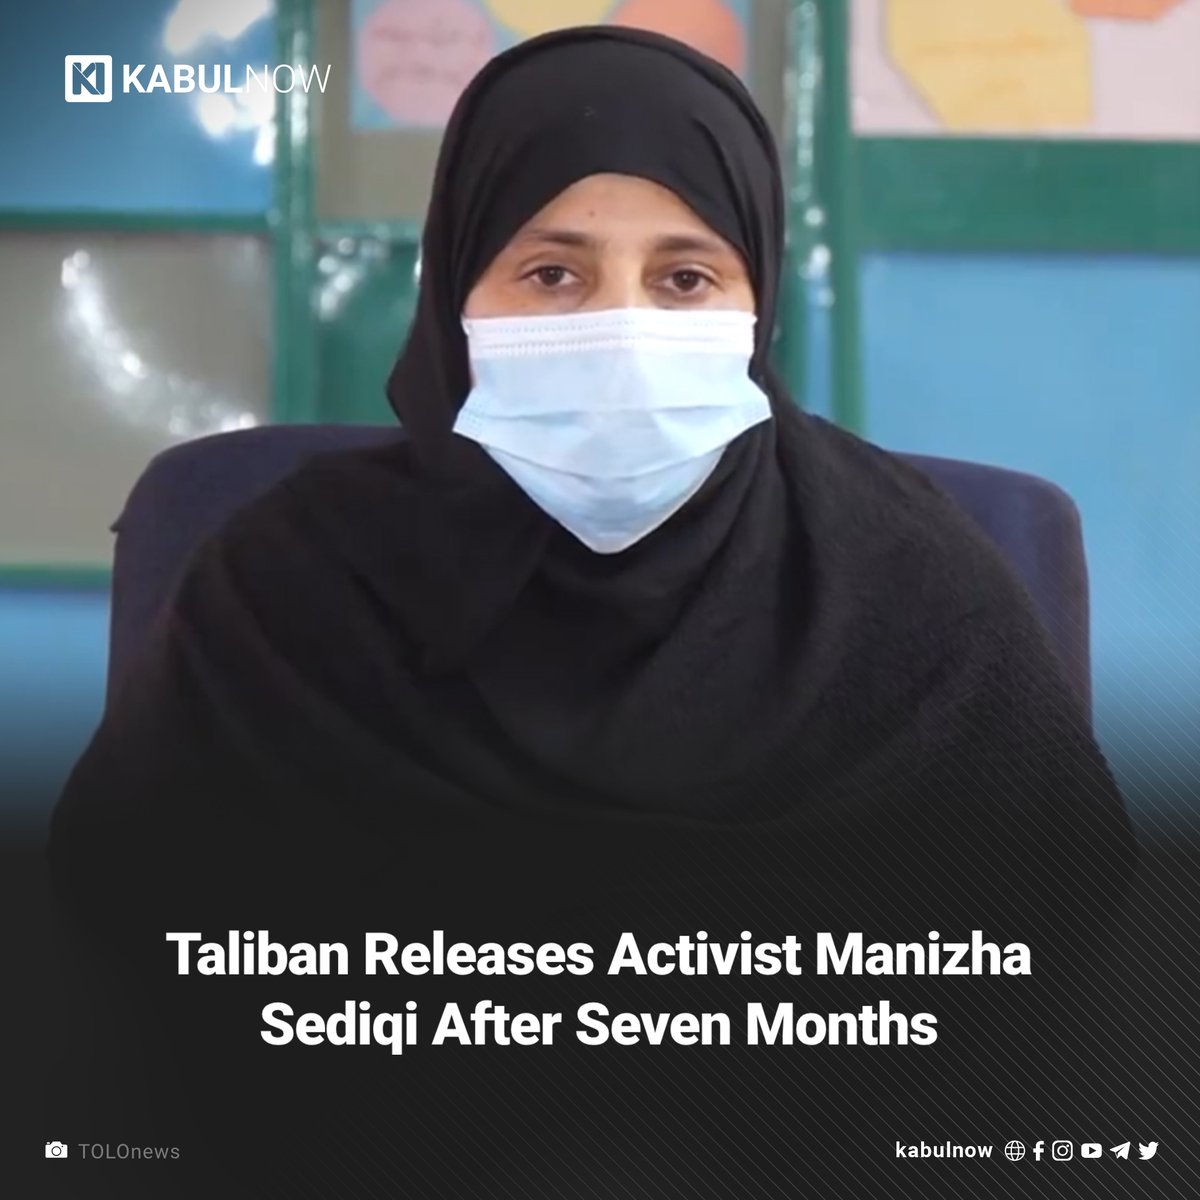 The Taliban has released Manizha Sediqi, a women’s rights activist who was arrested from her home in Kabul last September, local sources confirmed. Read more here: kabulnow.com/?p=35291